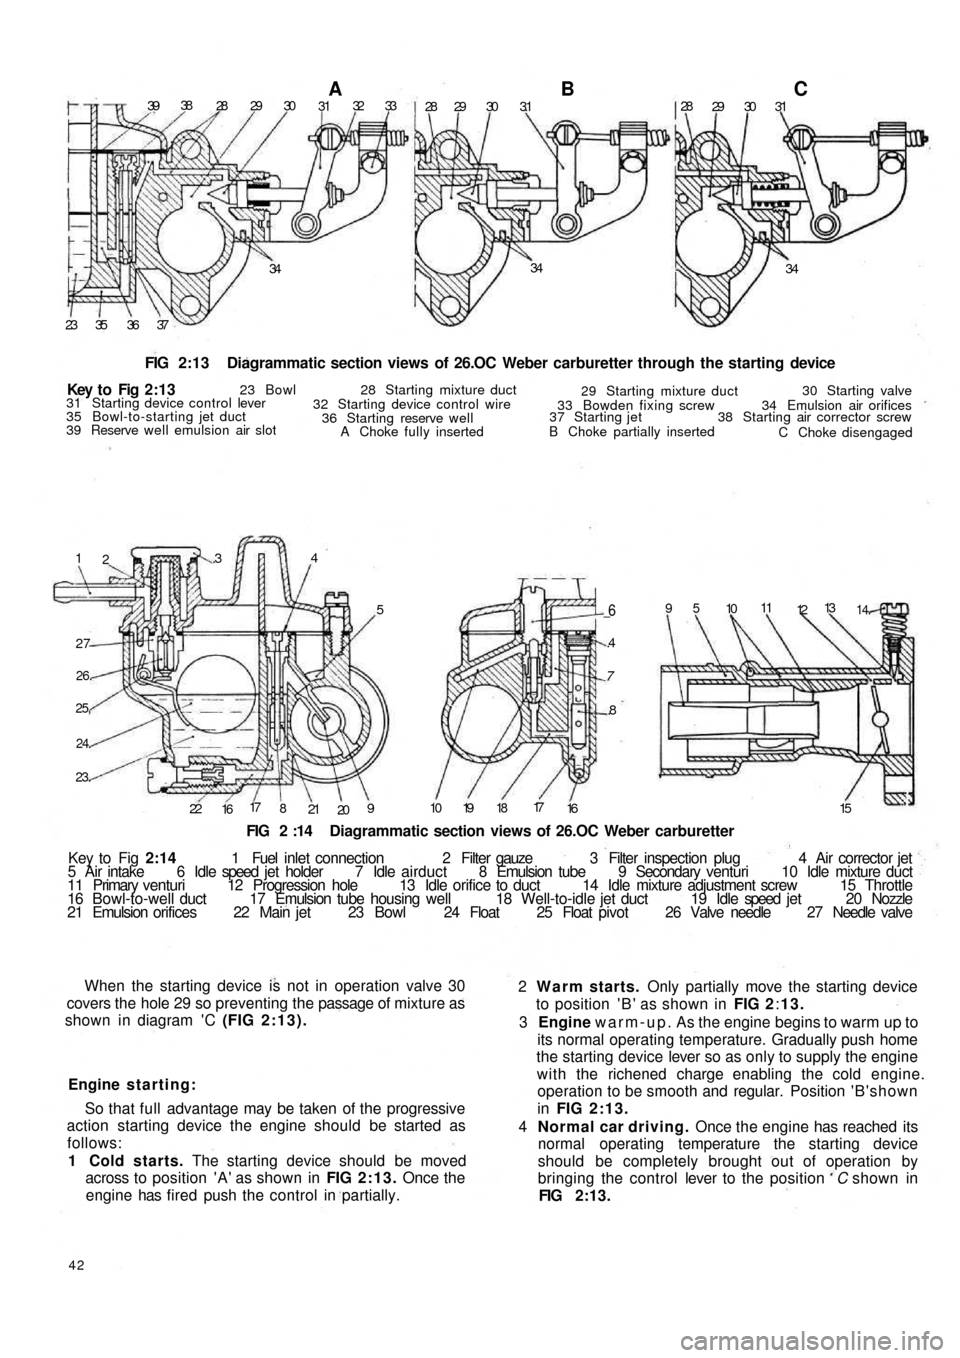 FIAT 500 1957 1.G Workshop Manual 3938
28 29 30A3132 33
28 29 30 3.1B28
29 30 31C
34 34
34
37 36 35 23
FIG 2:13  Diagrammatic section views of 26.OC Weber carburetter through the starting device
1
2.34
5
27
26.
25,
24.
23.
22
1617
8
2